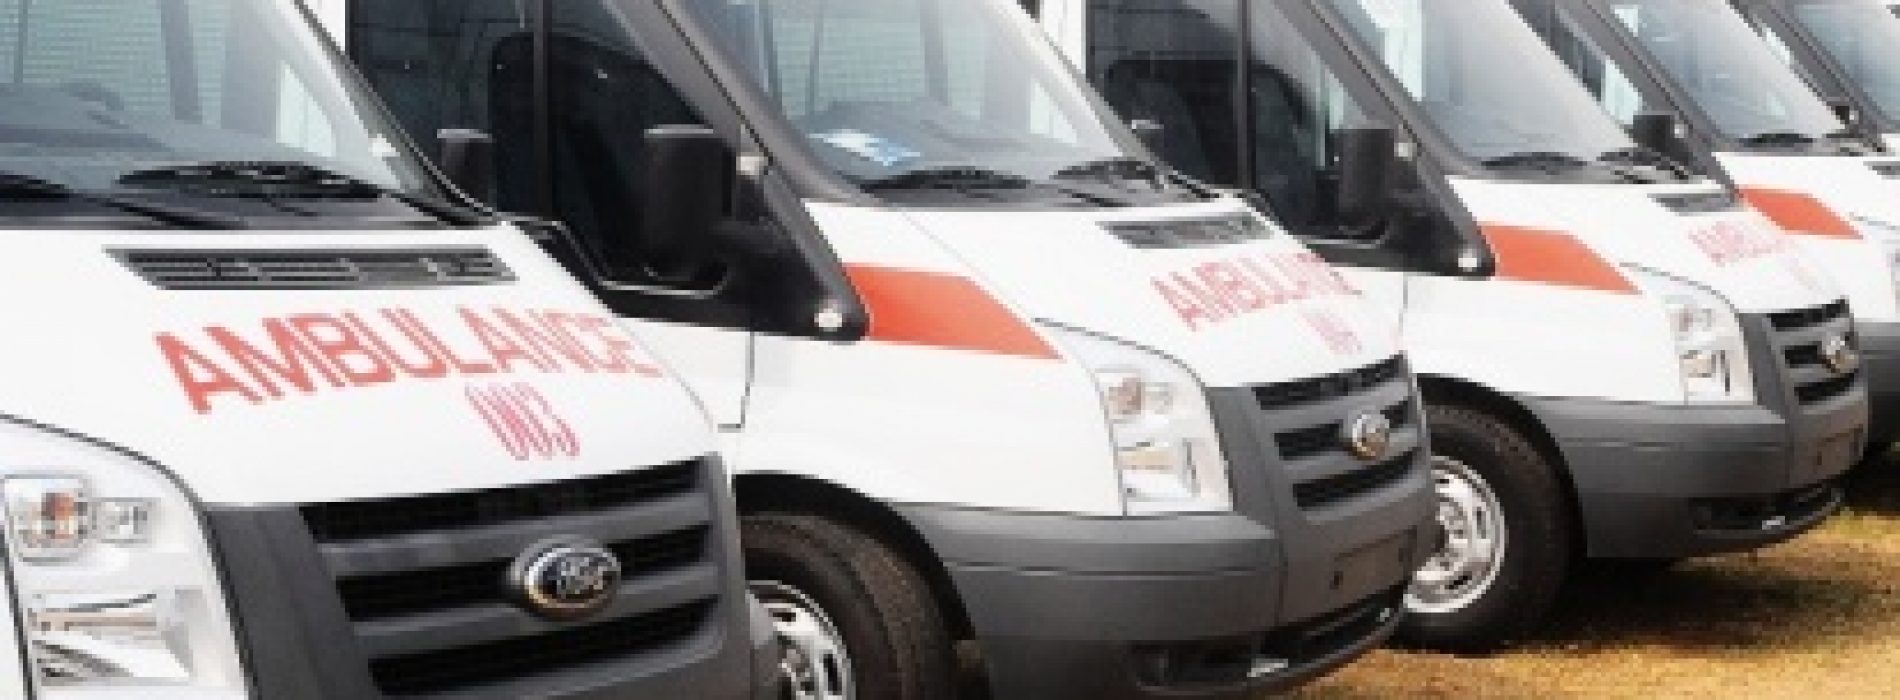 Nigeria has less than 1000 functional ambulances, Health Minister says